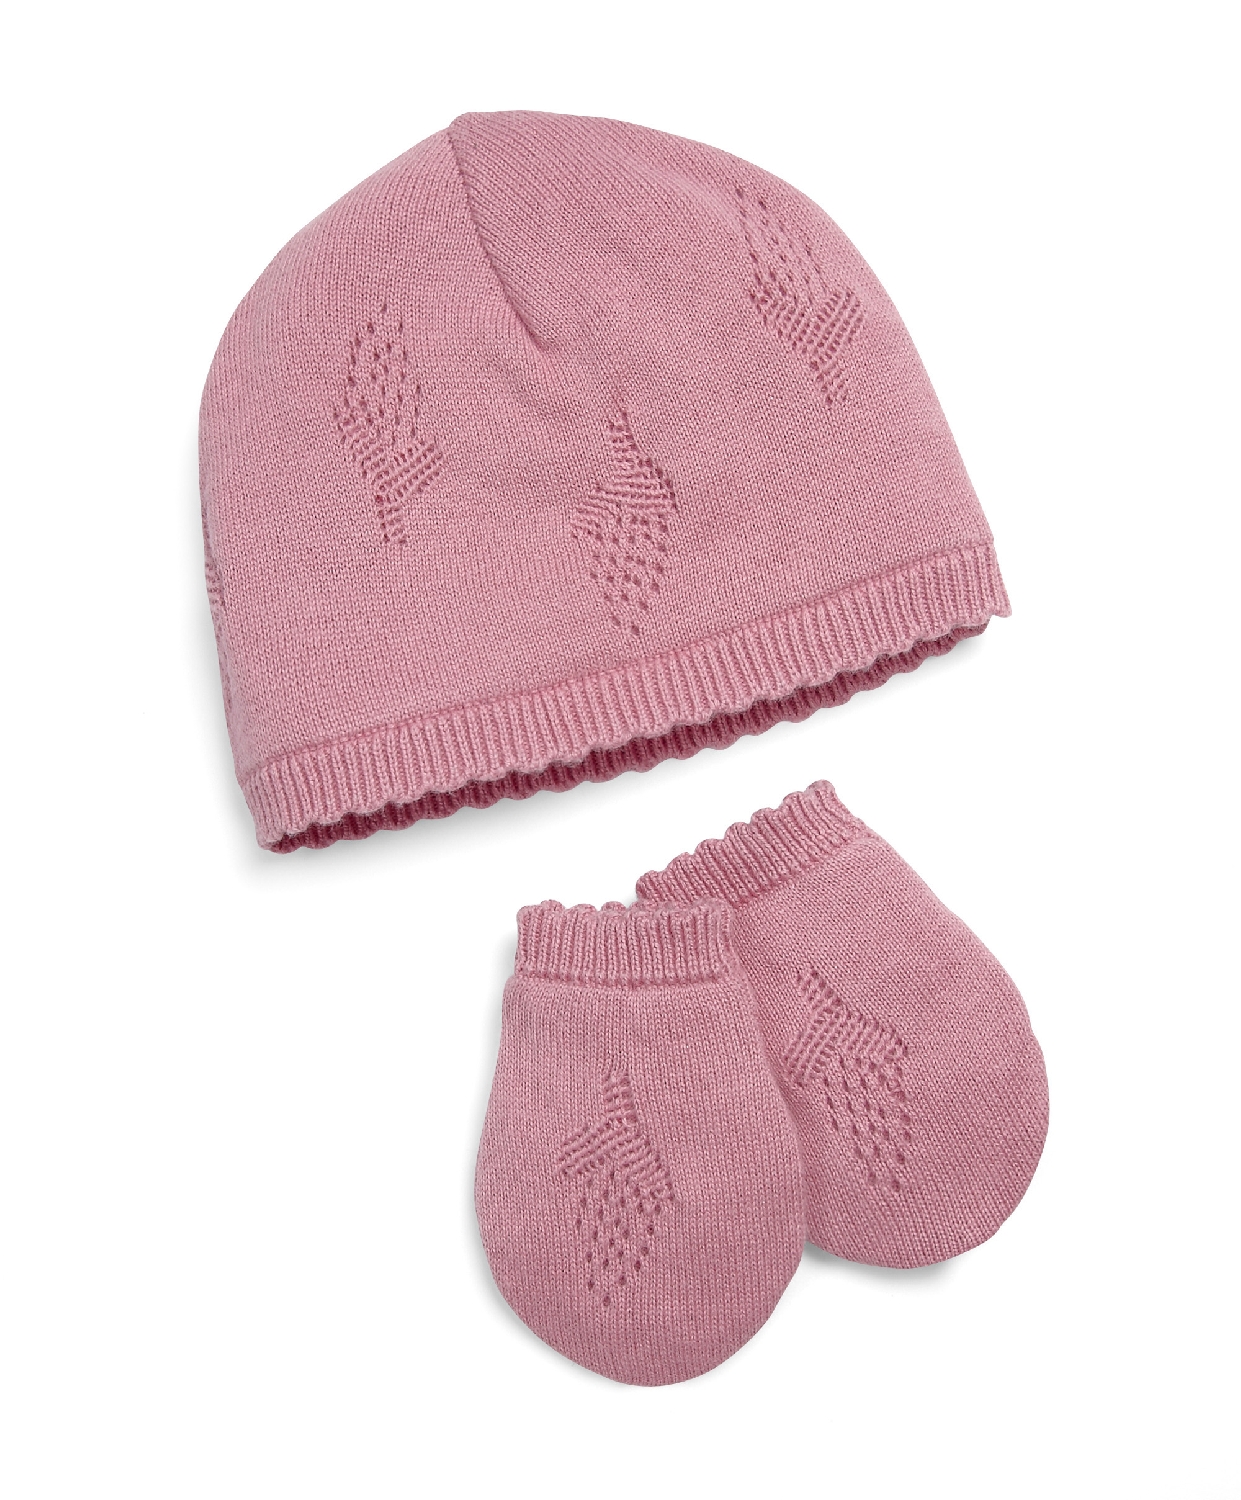 s432ap5-flower-knit-hat-&-mitts-